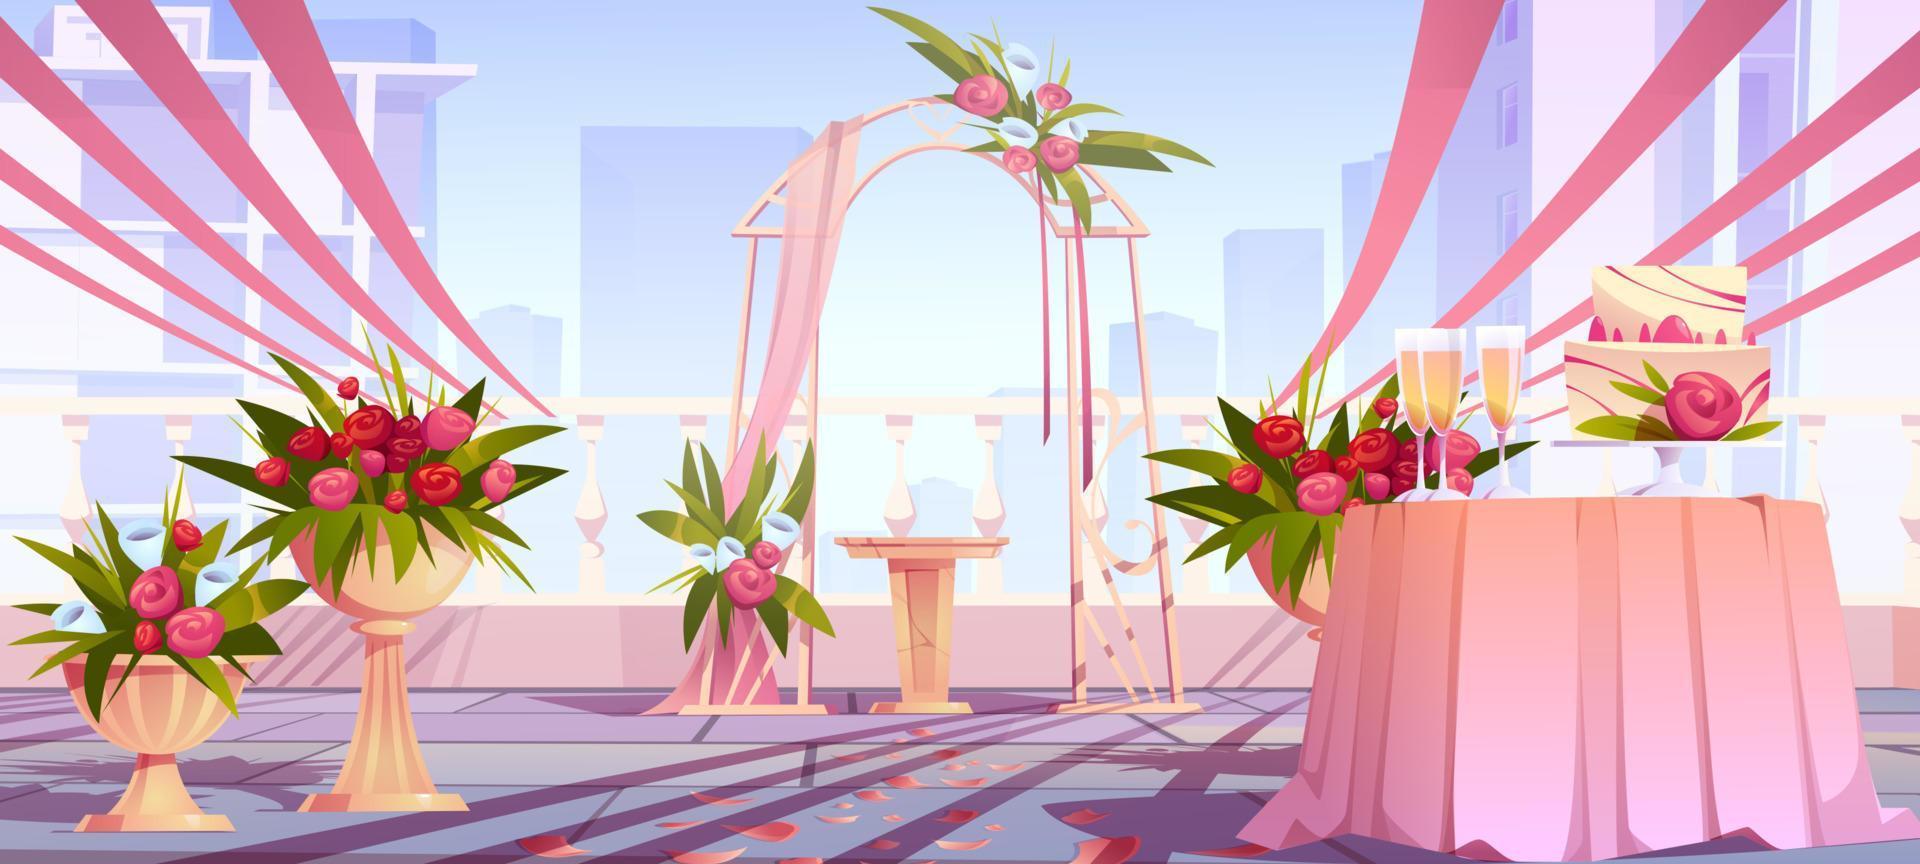 Wedding arch and decoration on skyscraper rooftop vector